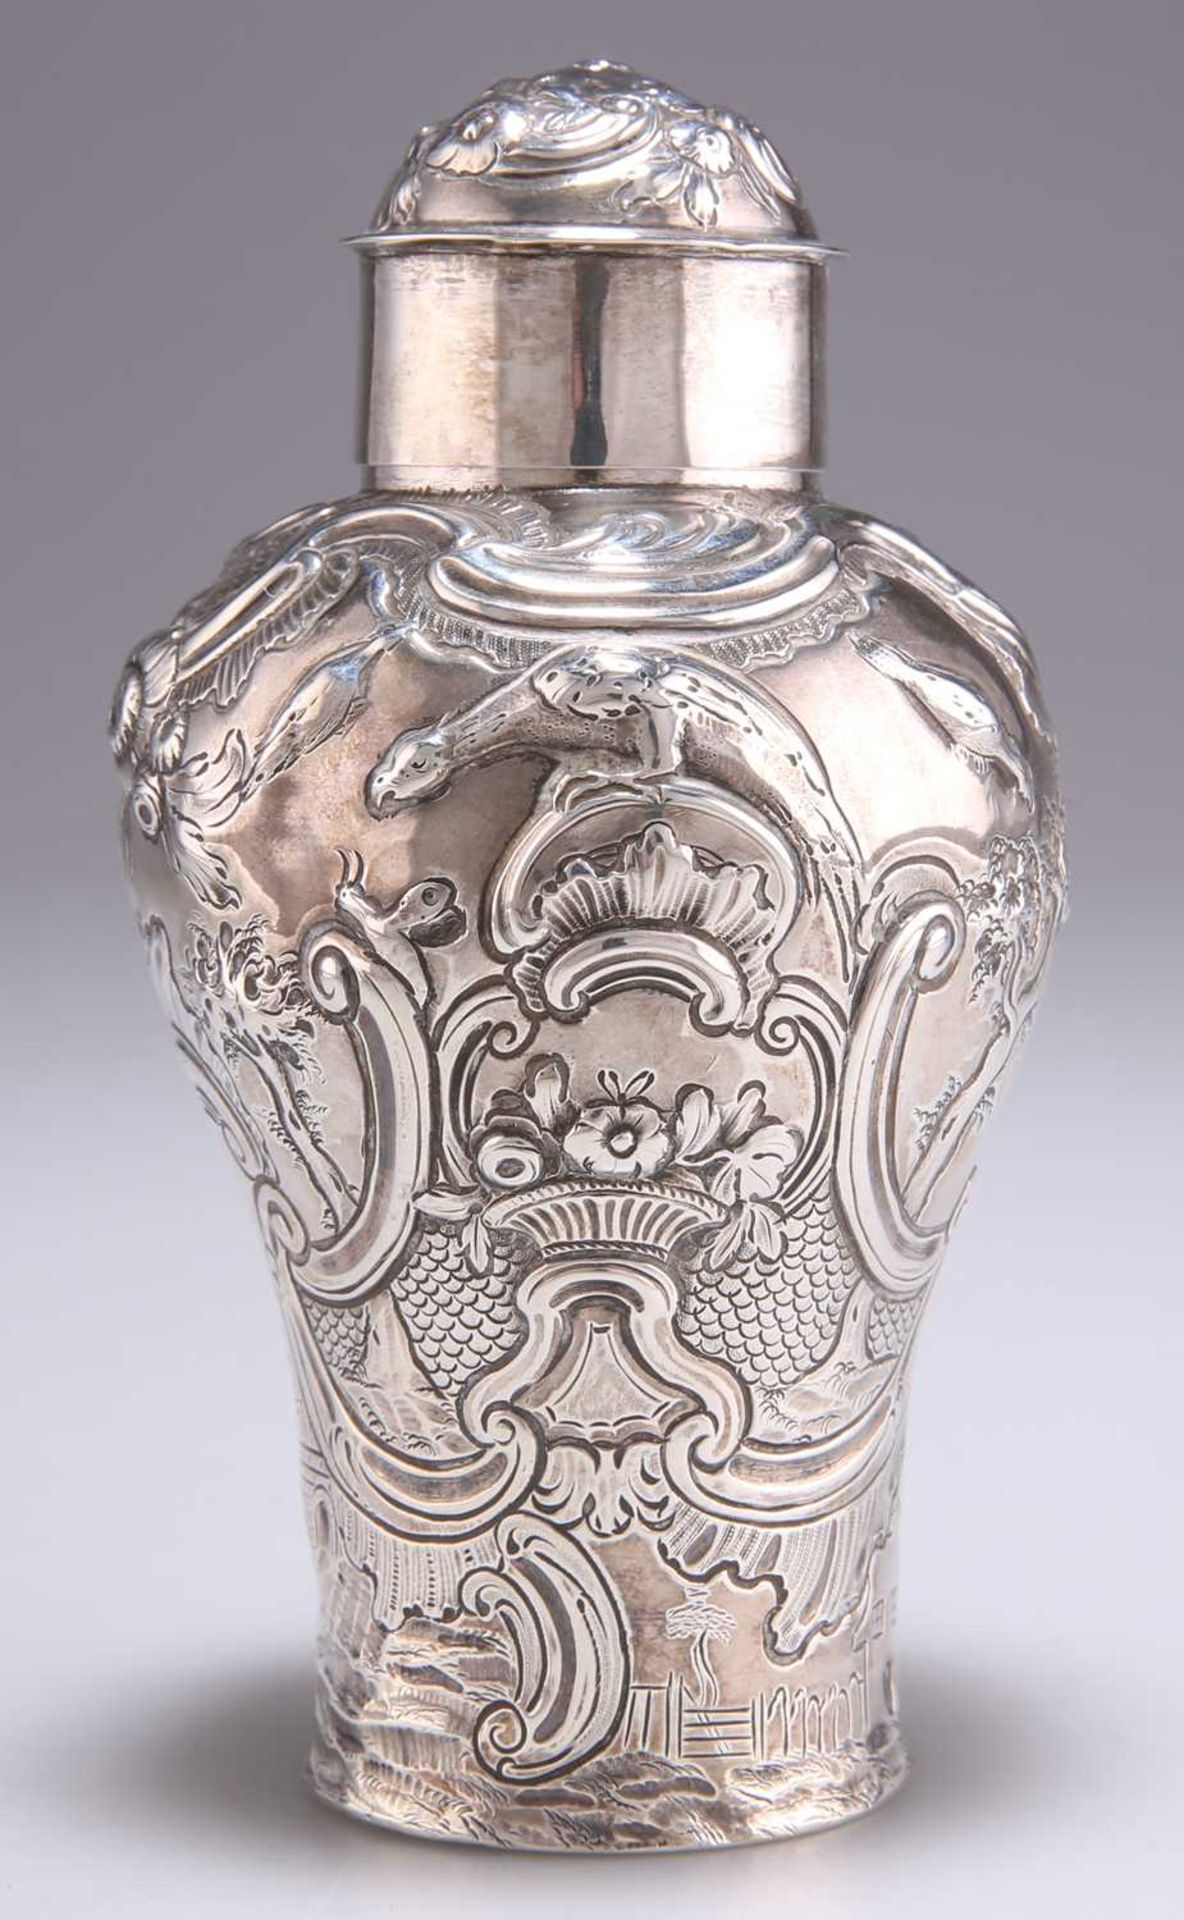 A GEORGE II SILVER CADDY - Image 2 of 4